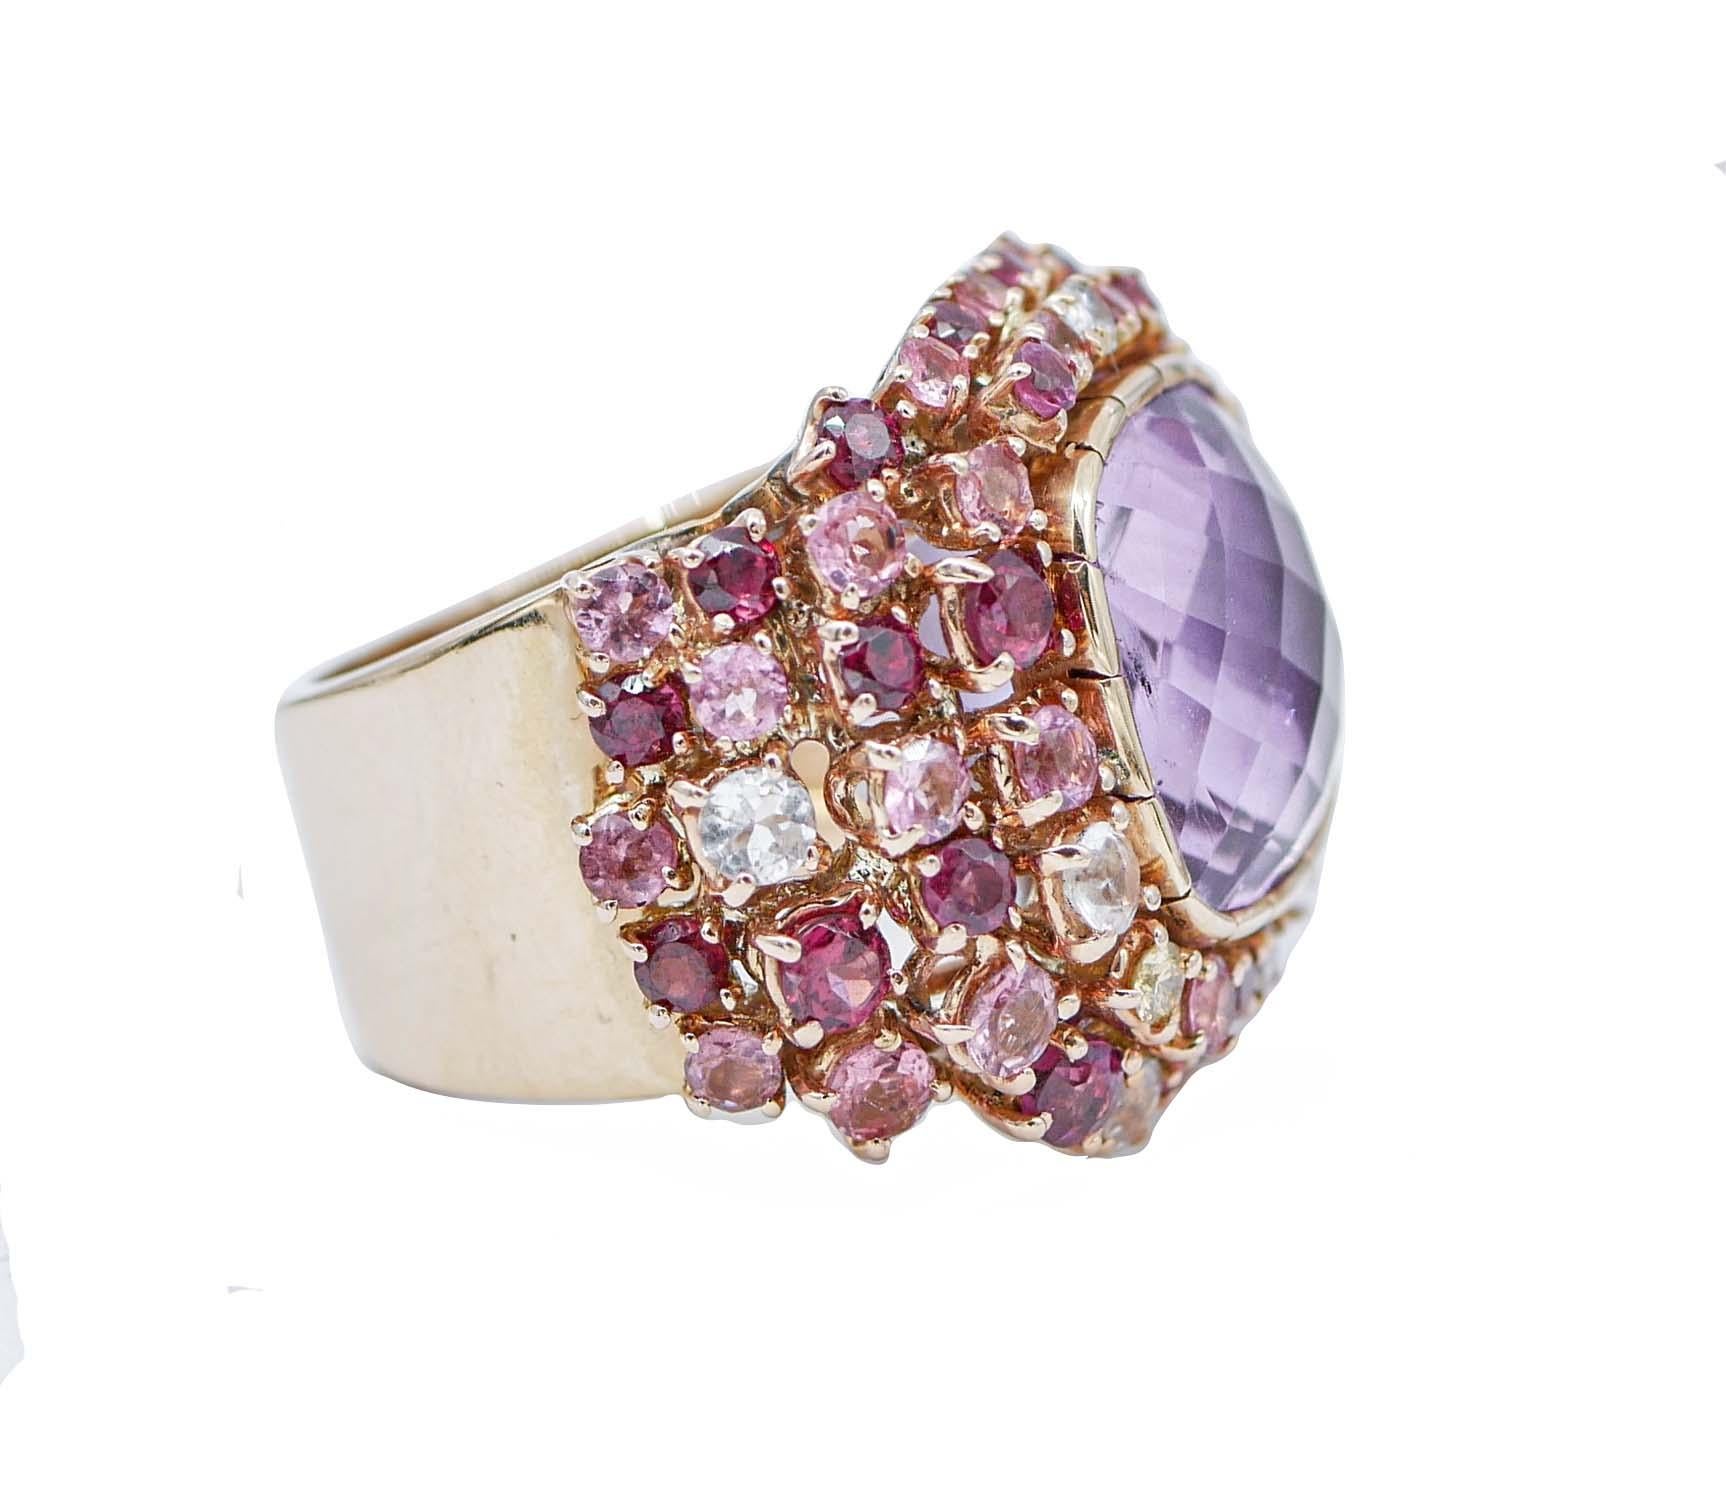 SHIPPING POLICY:
No additional costs will be added to this order.
Shipping costs will be totally covered by the seller (customs duties included).

Amazing retrò ring in 14 kt rose gold structure mounted with a central amethyst ( 15 mm x 15 mm)